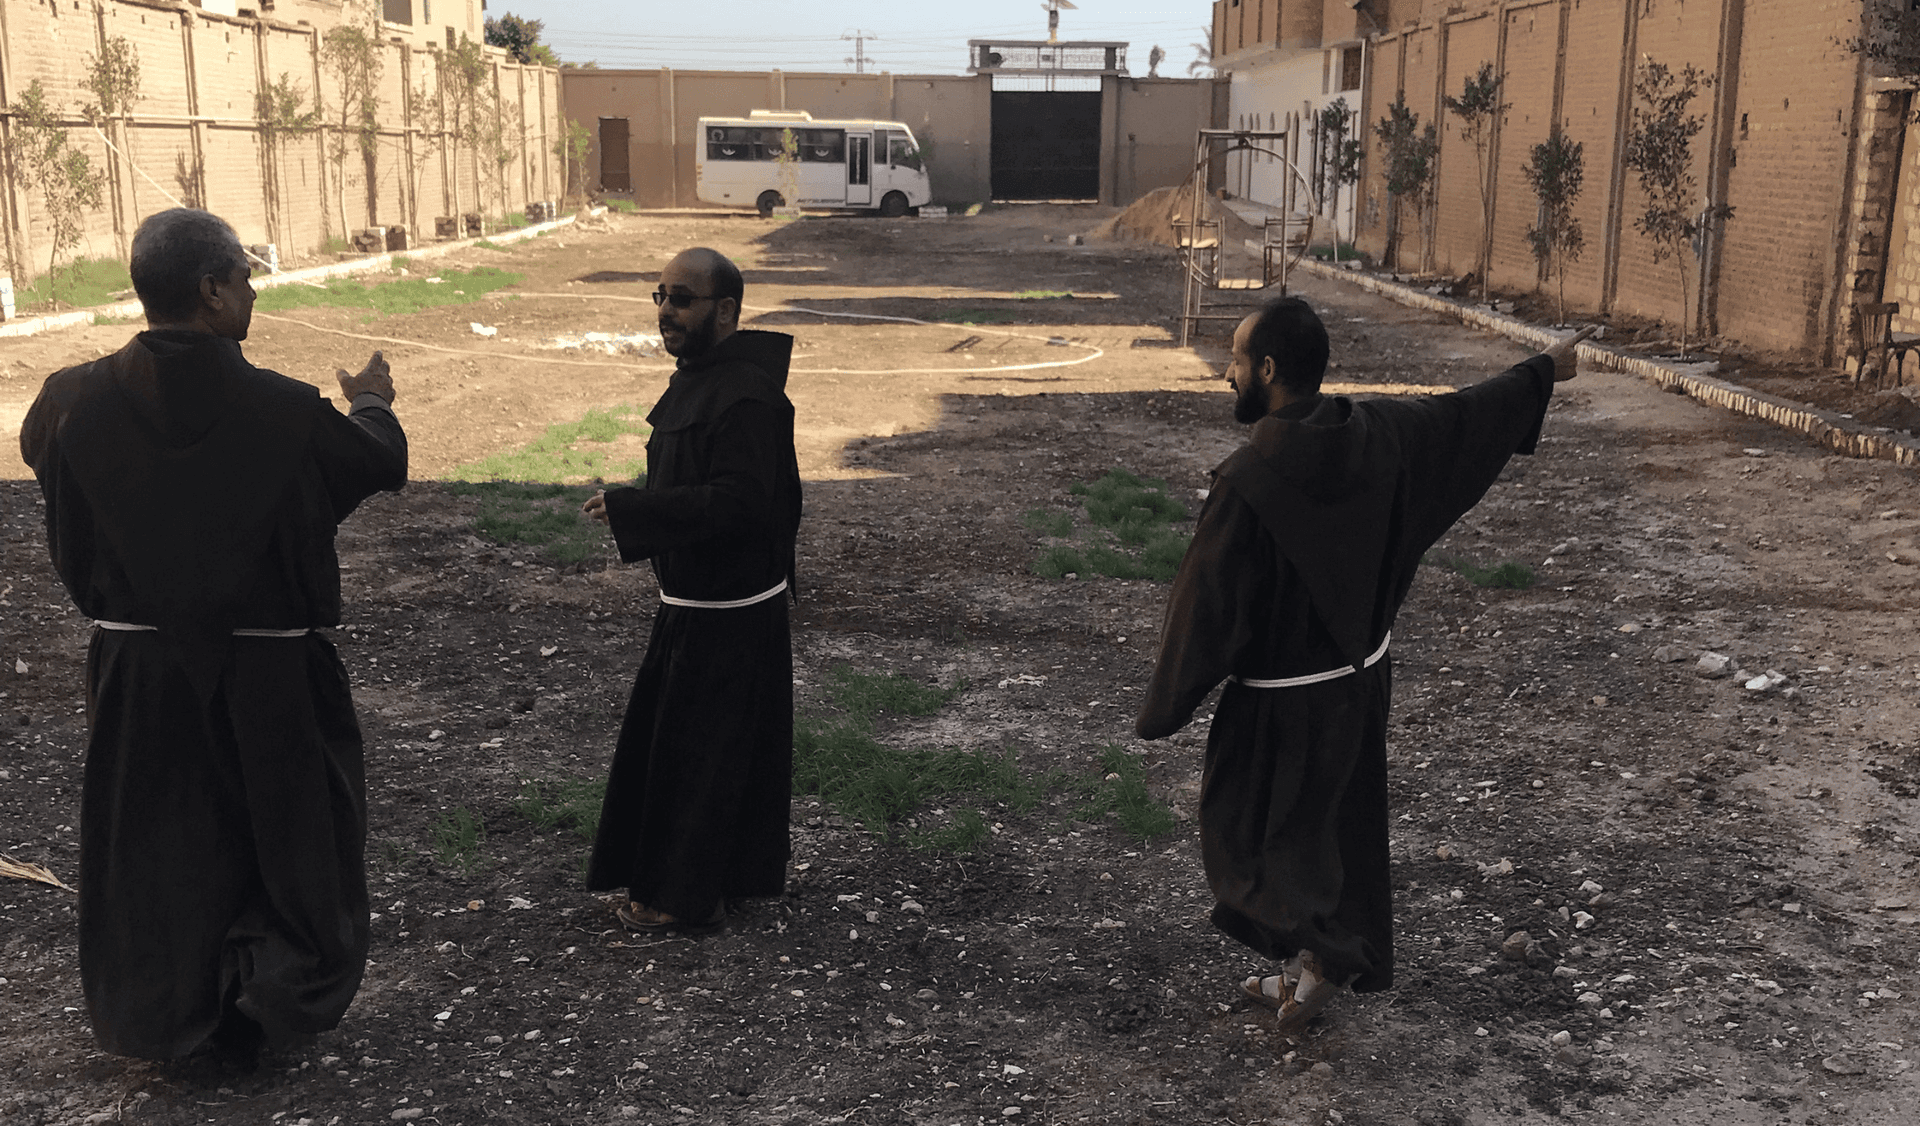 In the Muski Convent: the Custody of the Holy Land in Egypt